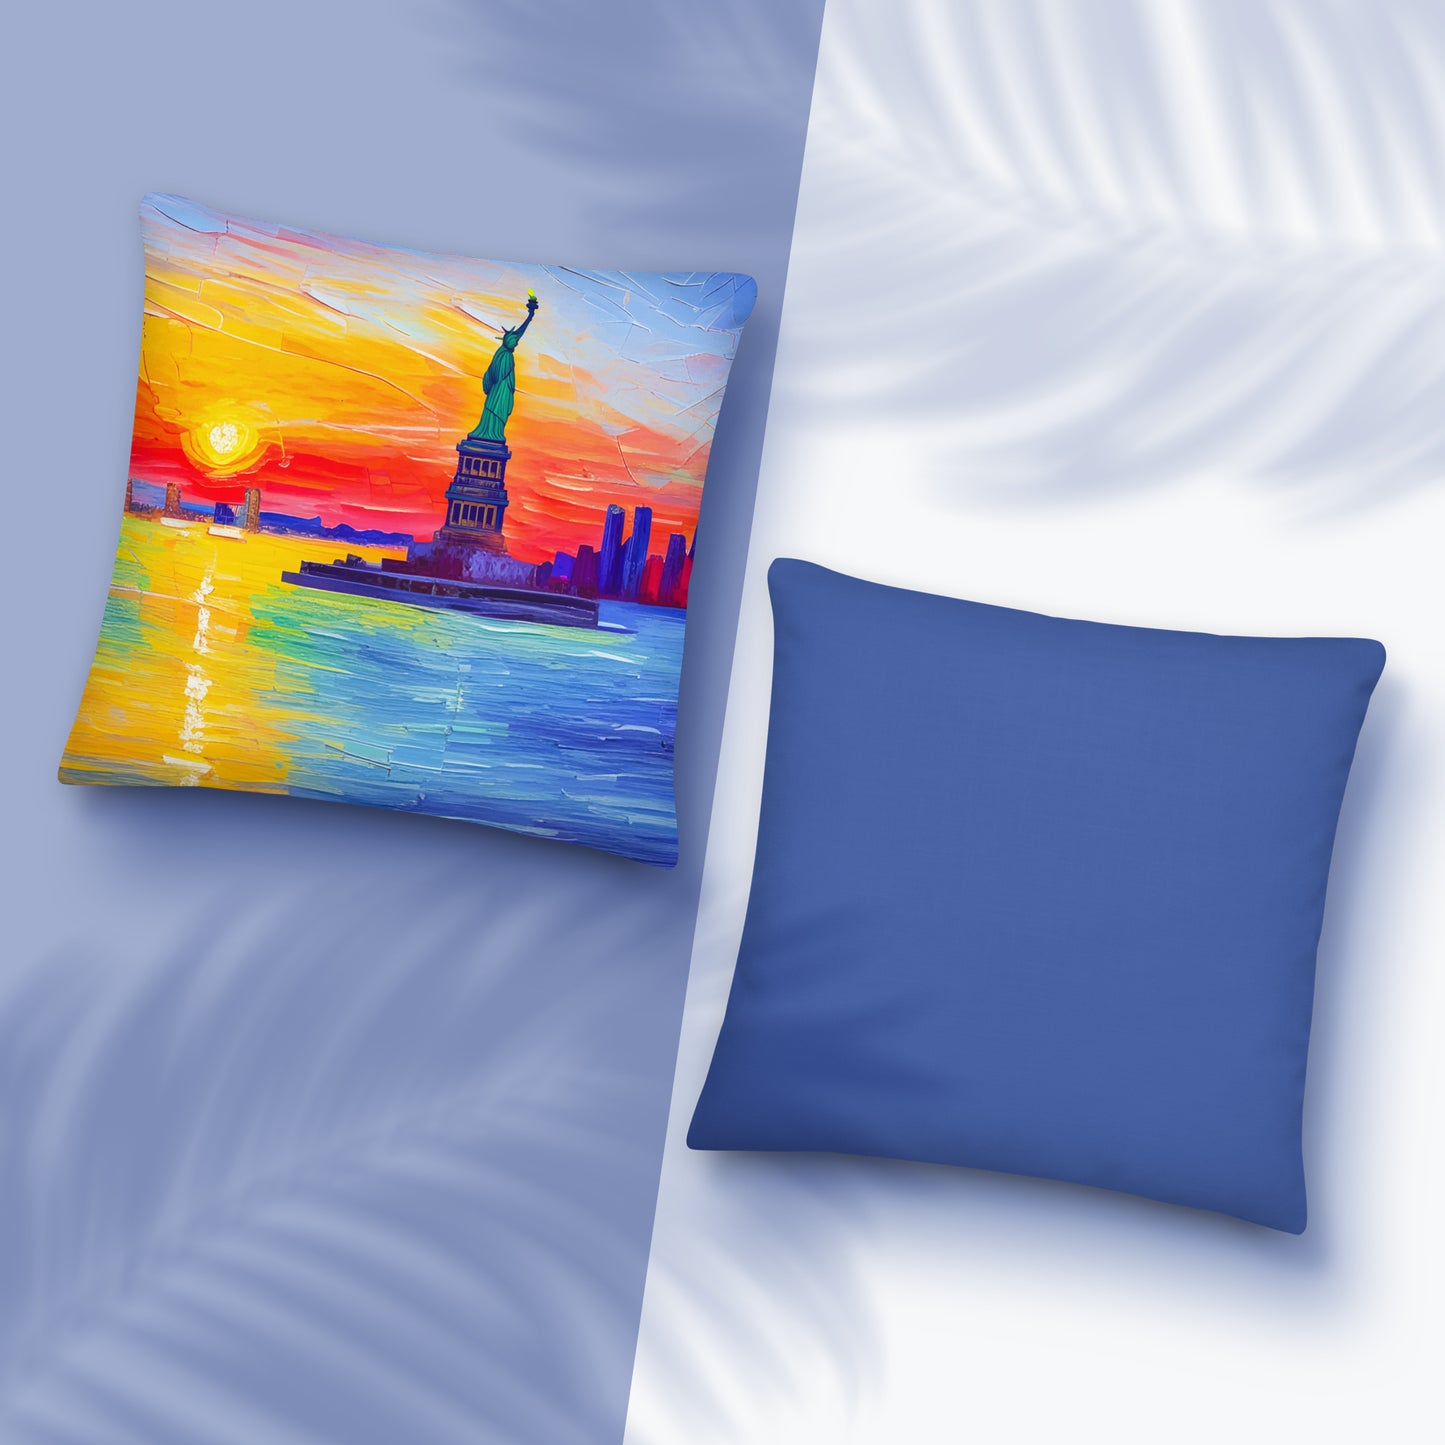 New York Design Premium Pillow | Enhance your space with vibrant colors and plushness | Seepu